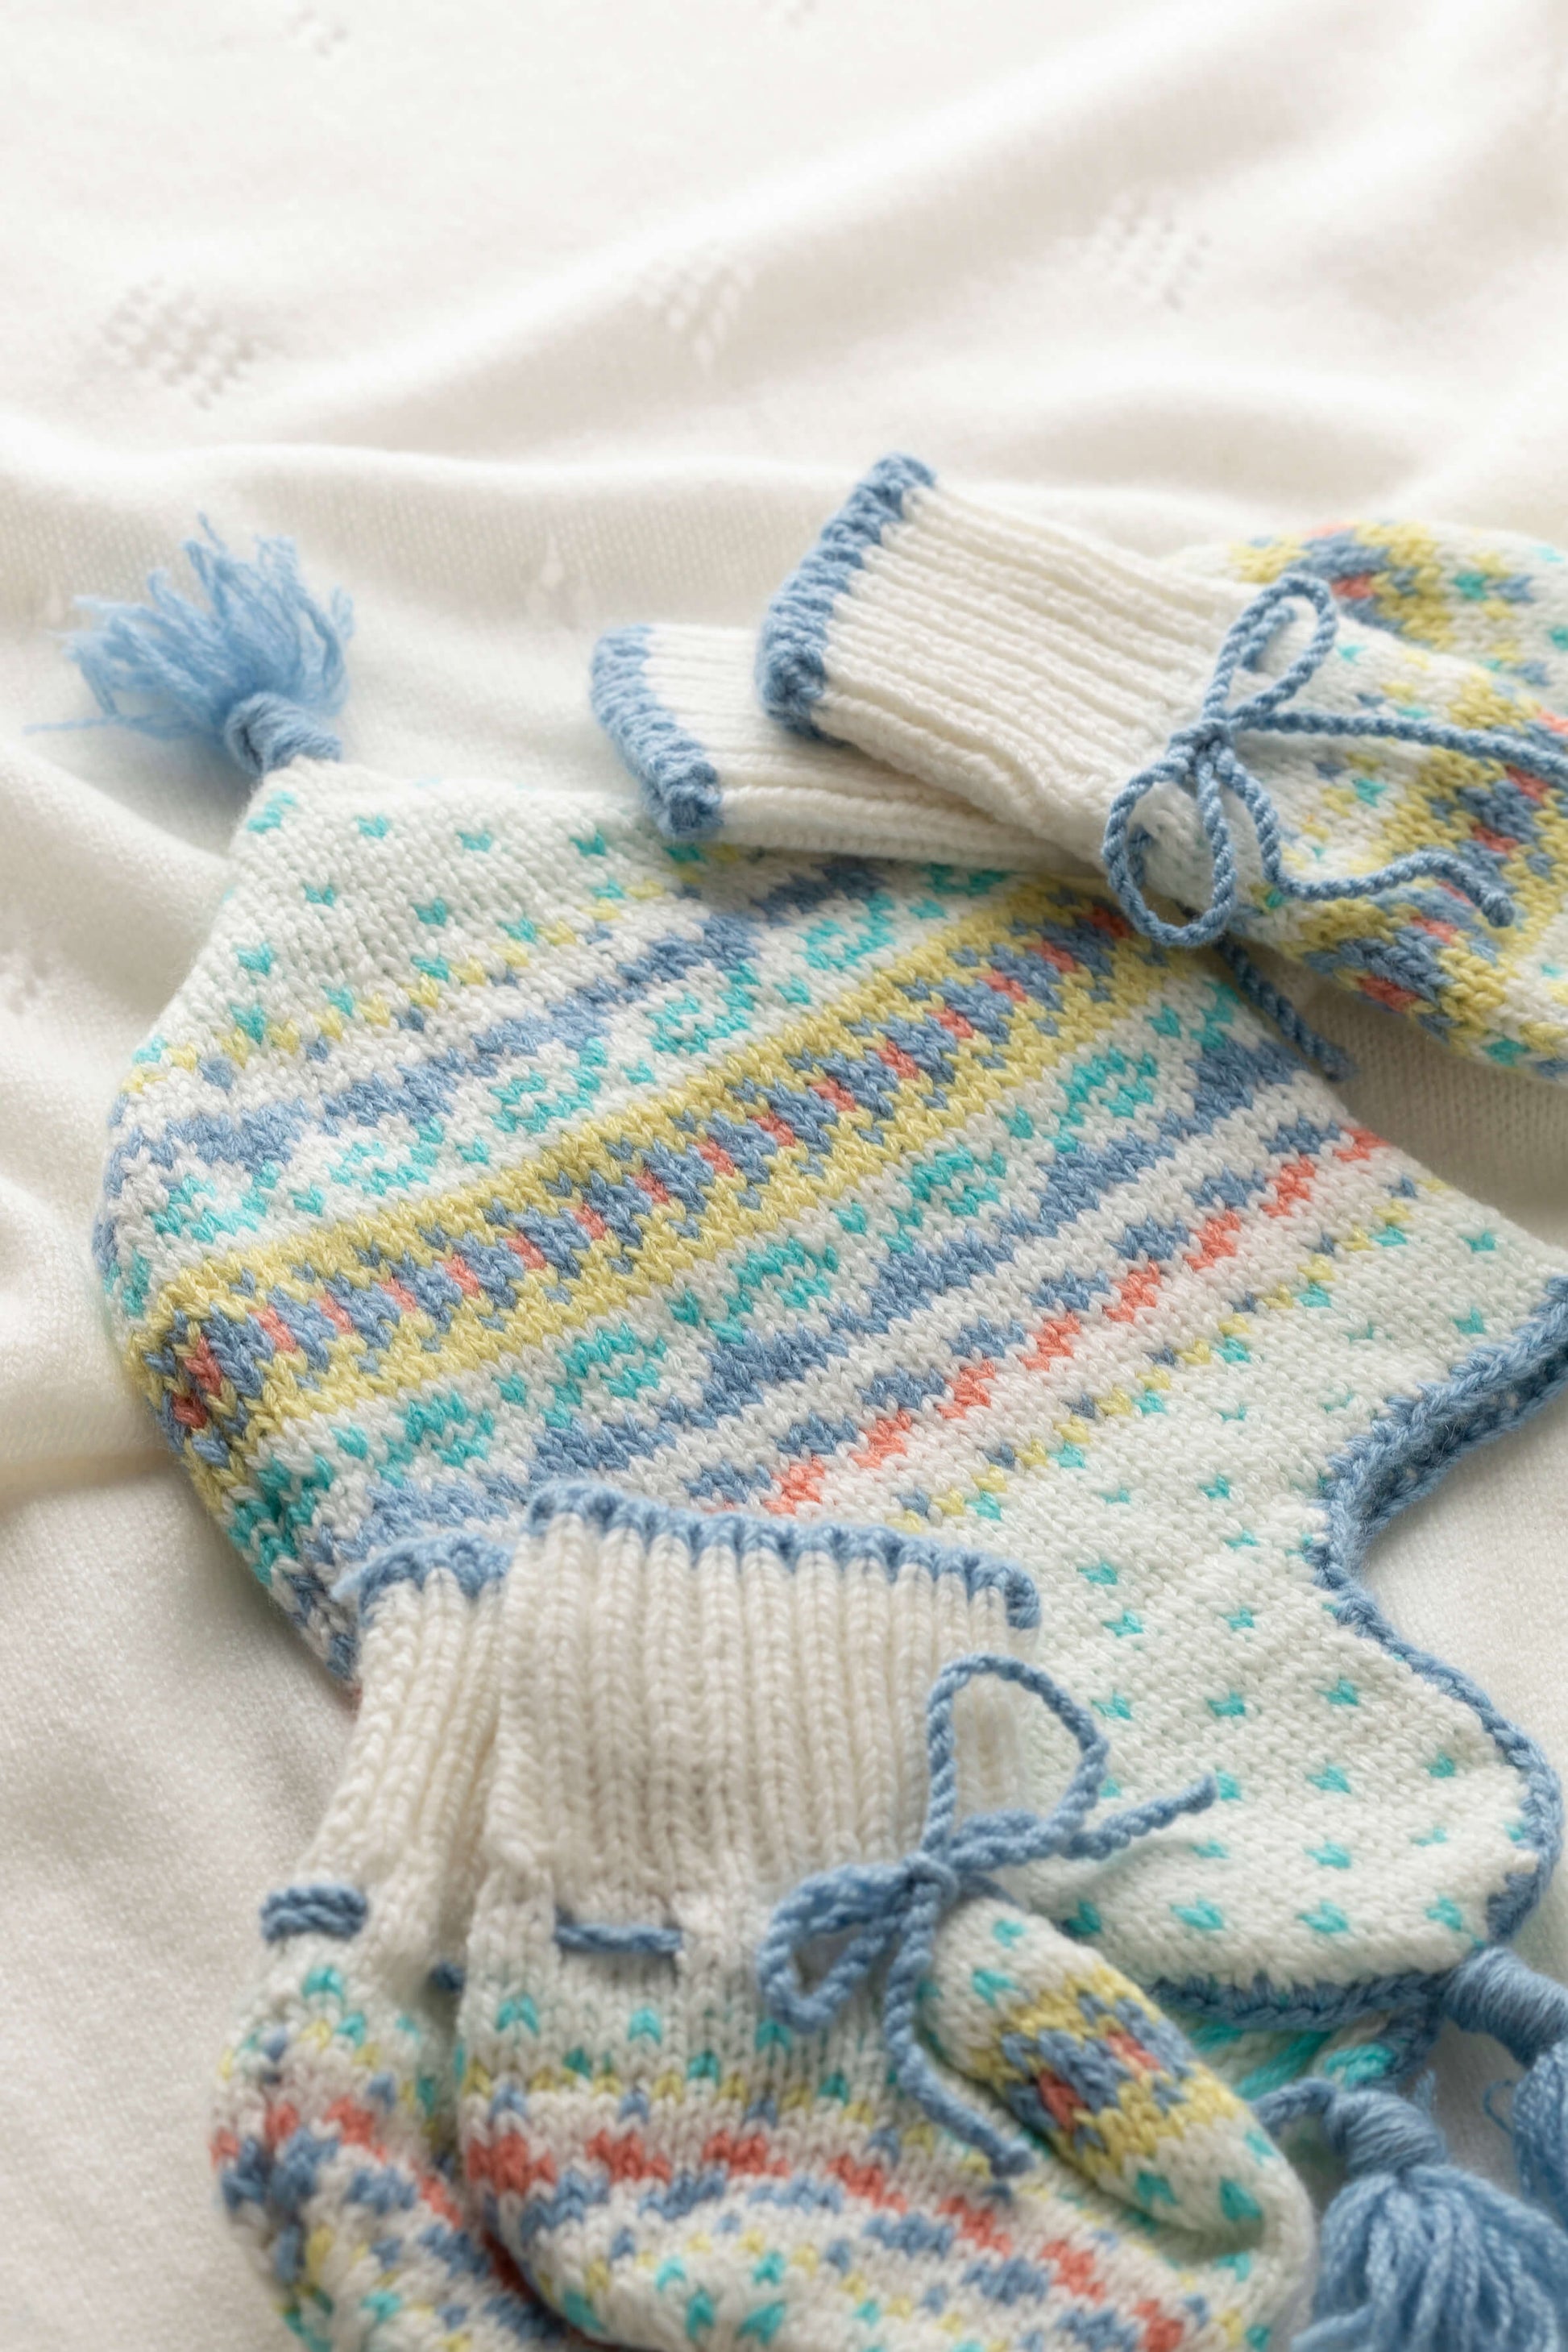 Johnstons of Elgin Baby Handknits SKYLINE (BLUE) Hand Knit Fairisle Cashmere Baby Booties 79014SD0309